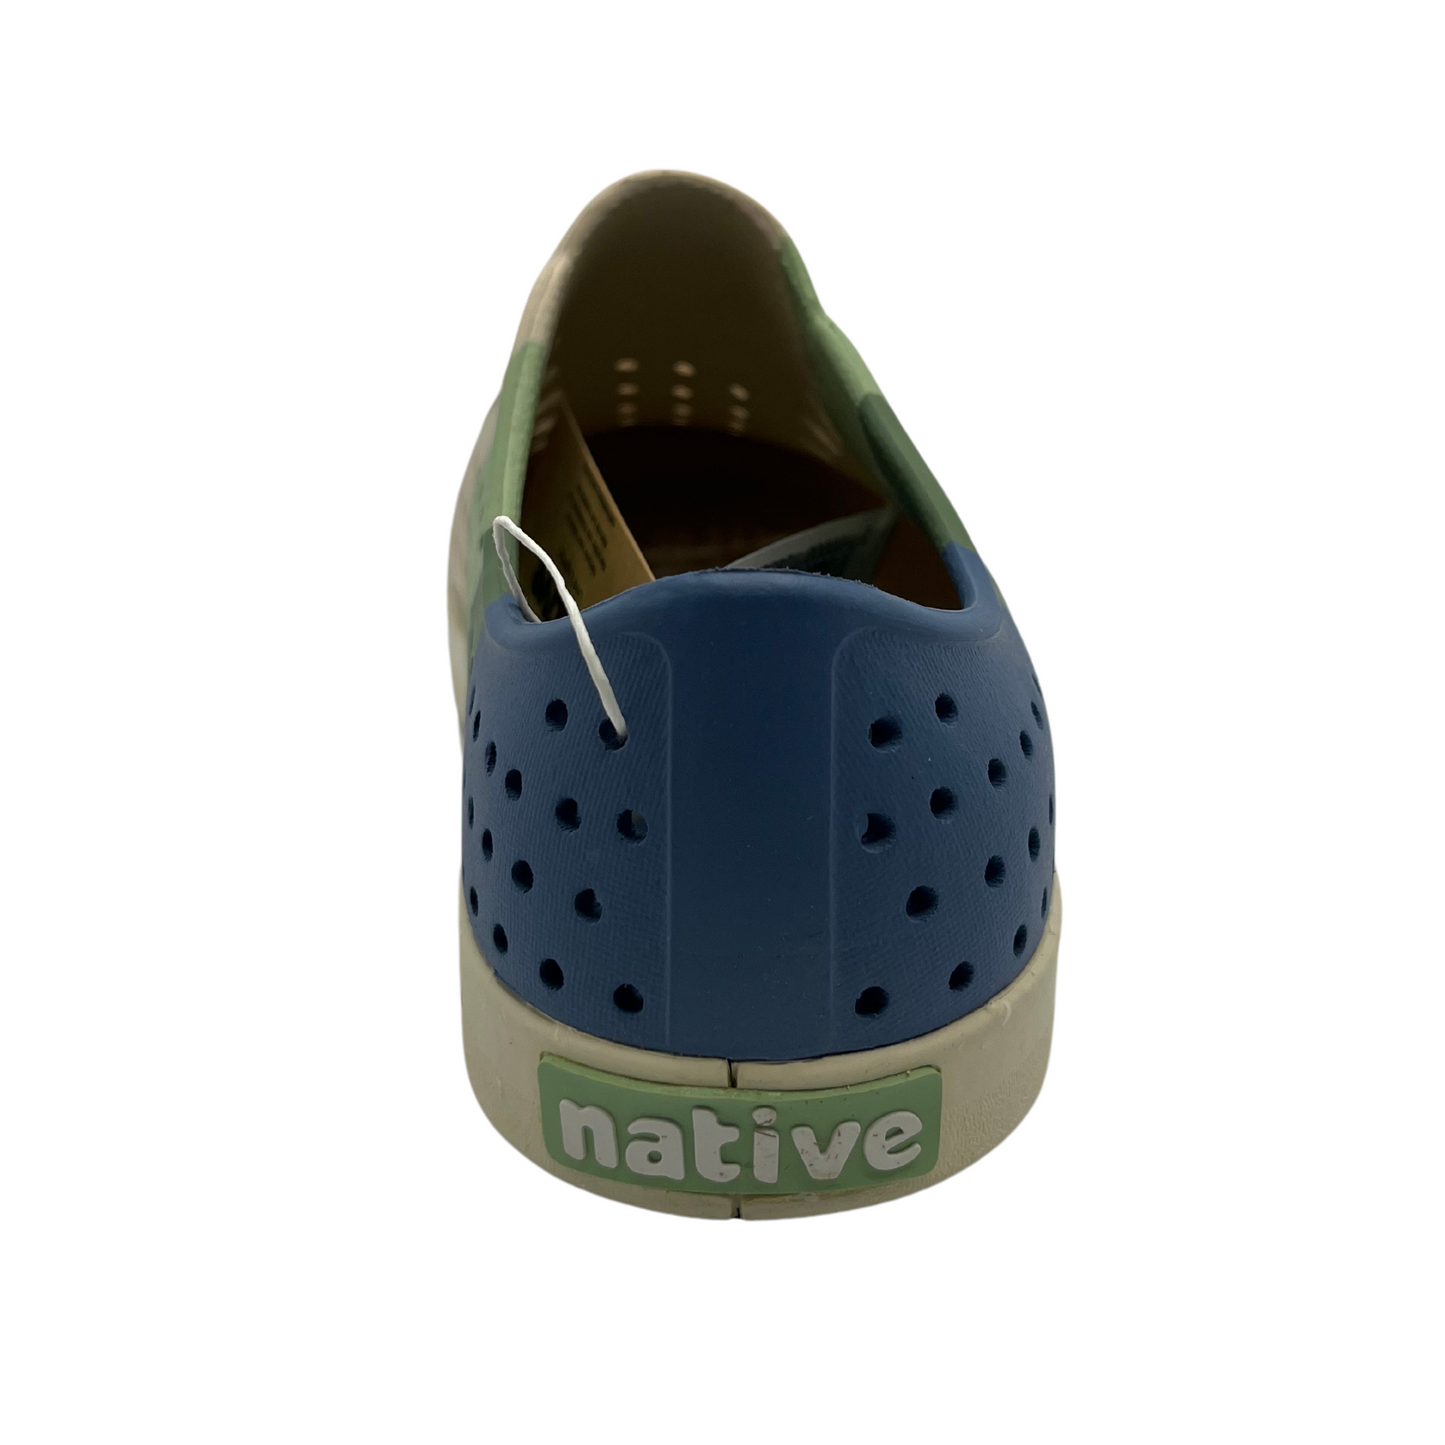 Back view of EVA perforated shoe with rounded toe